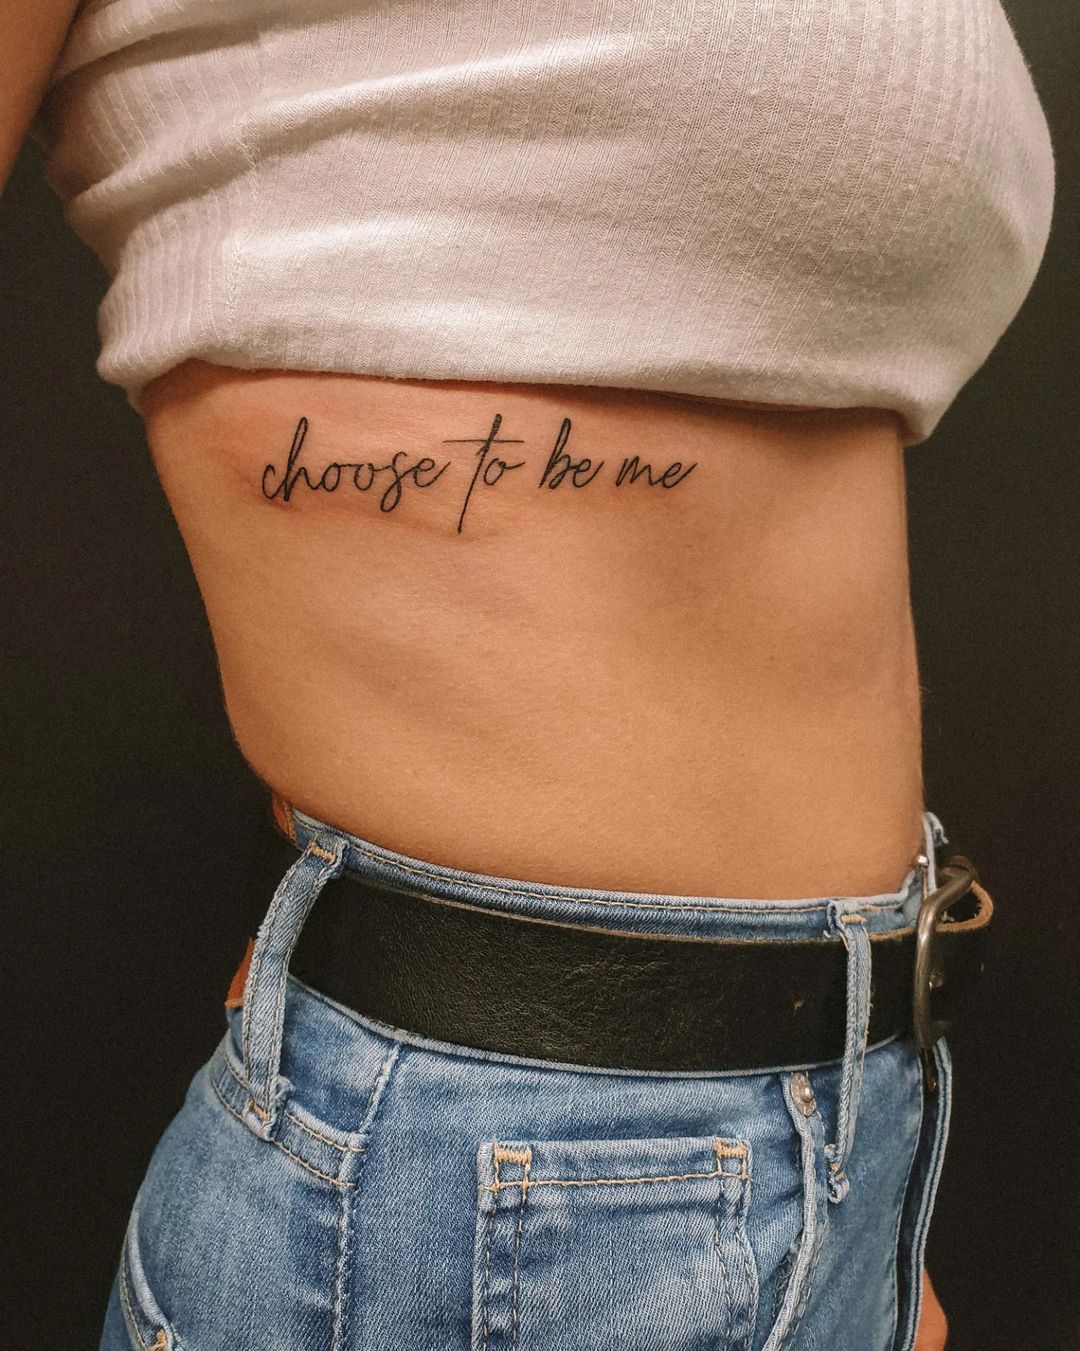 “Choose to be me” Tattoo on Side for Women